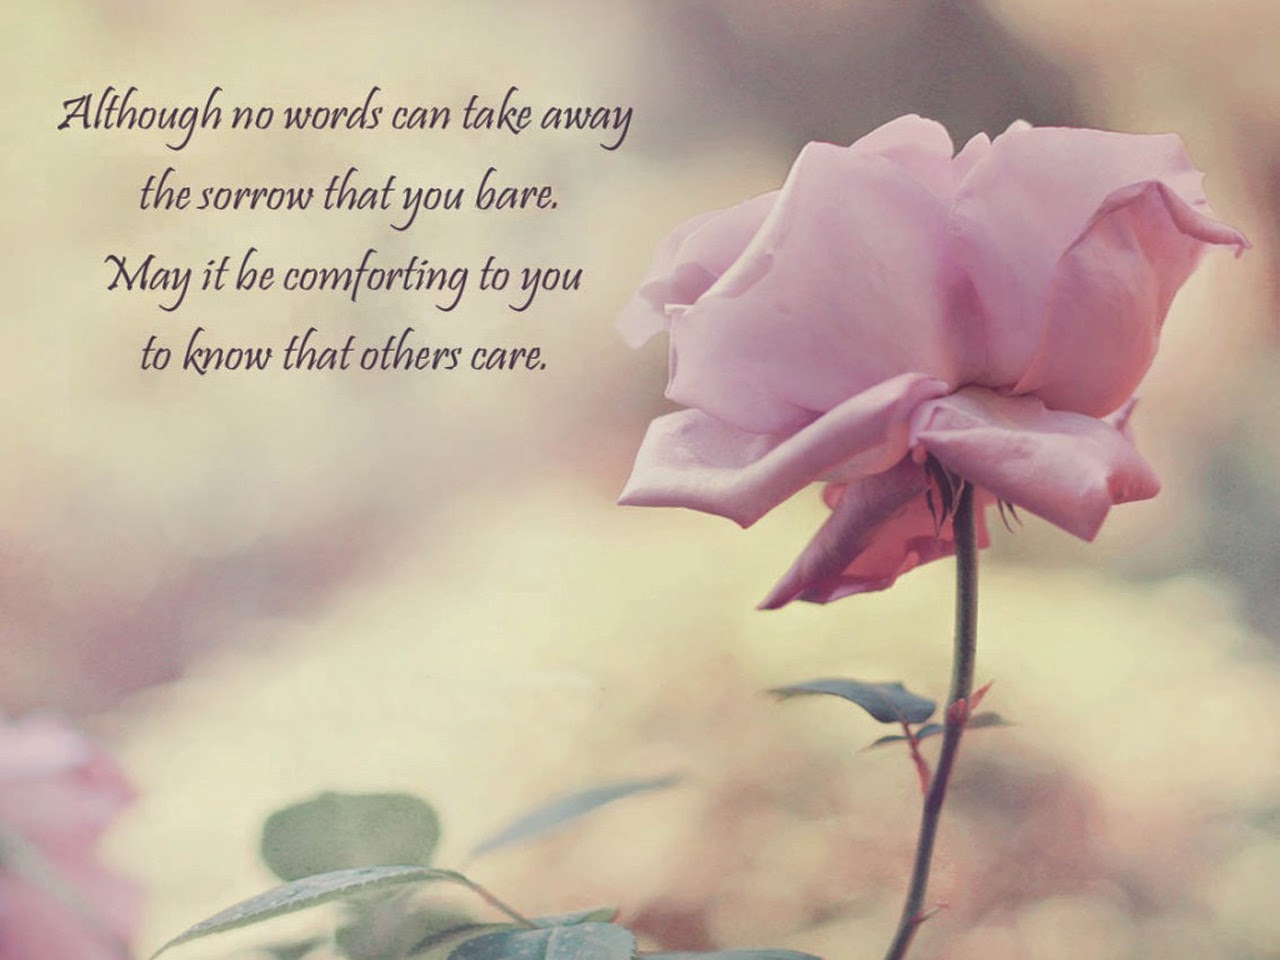 "Although no word can take away the sorrow that you bare